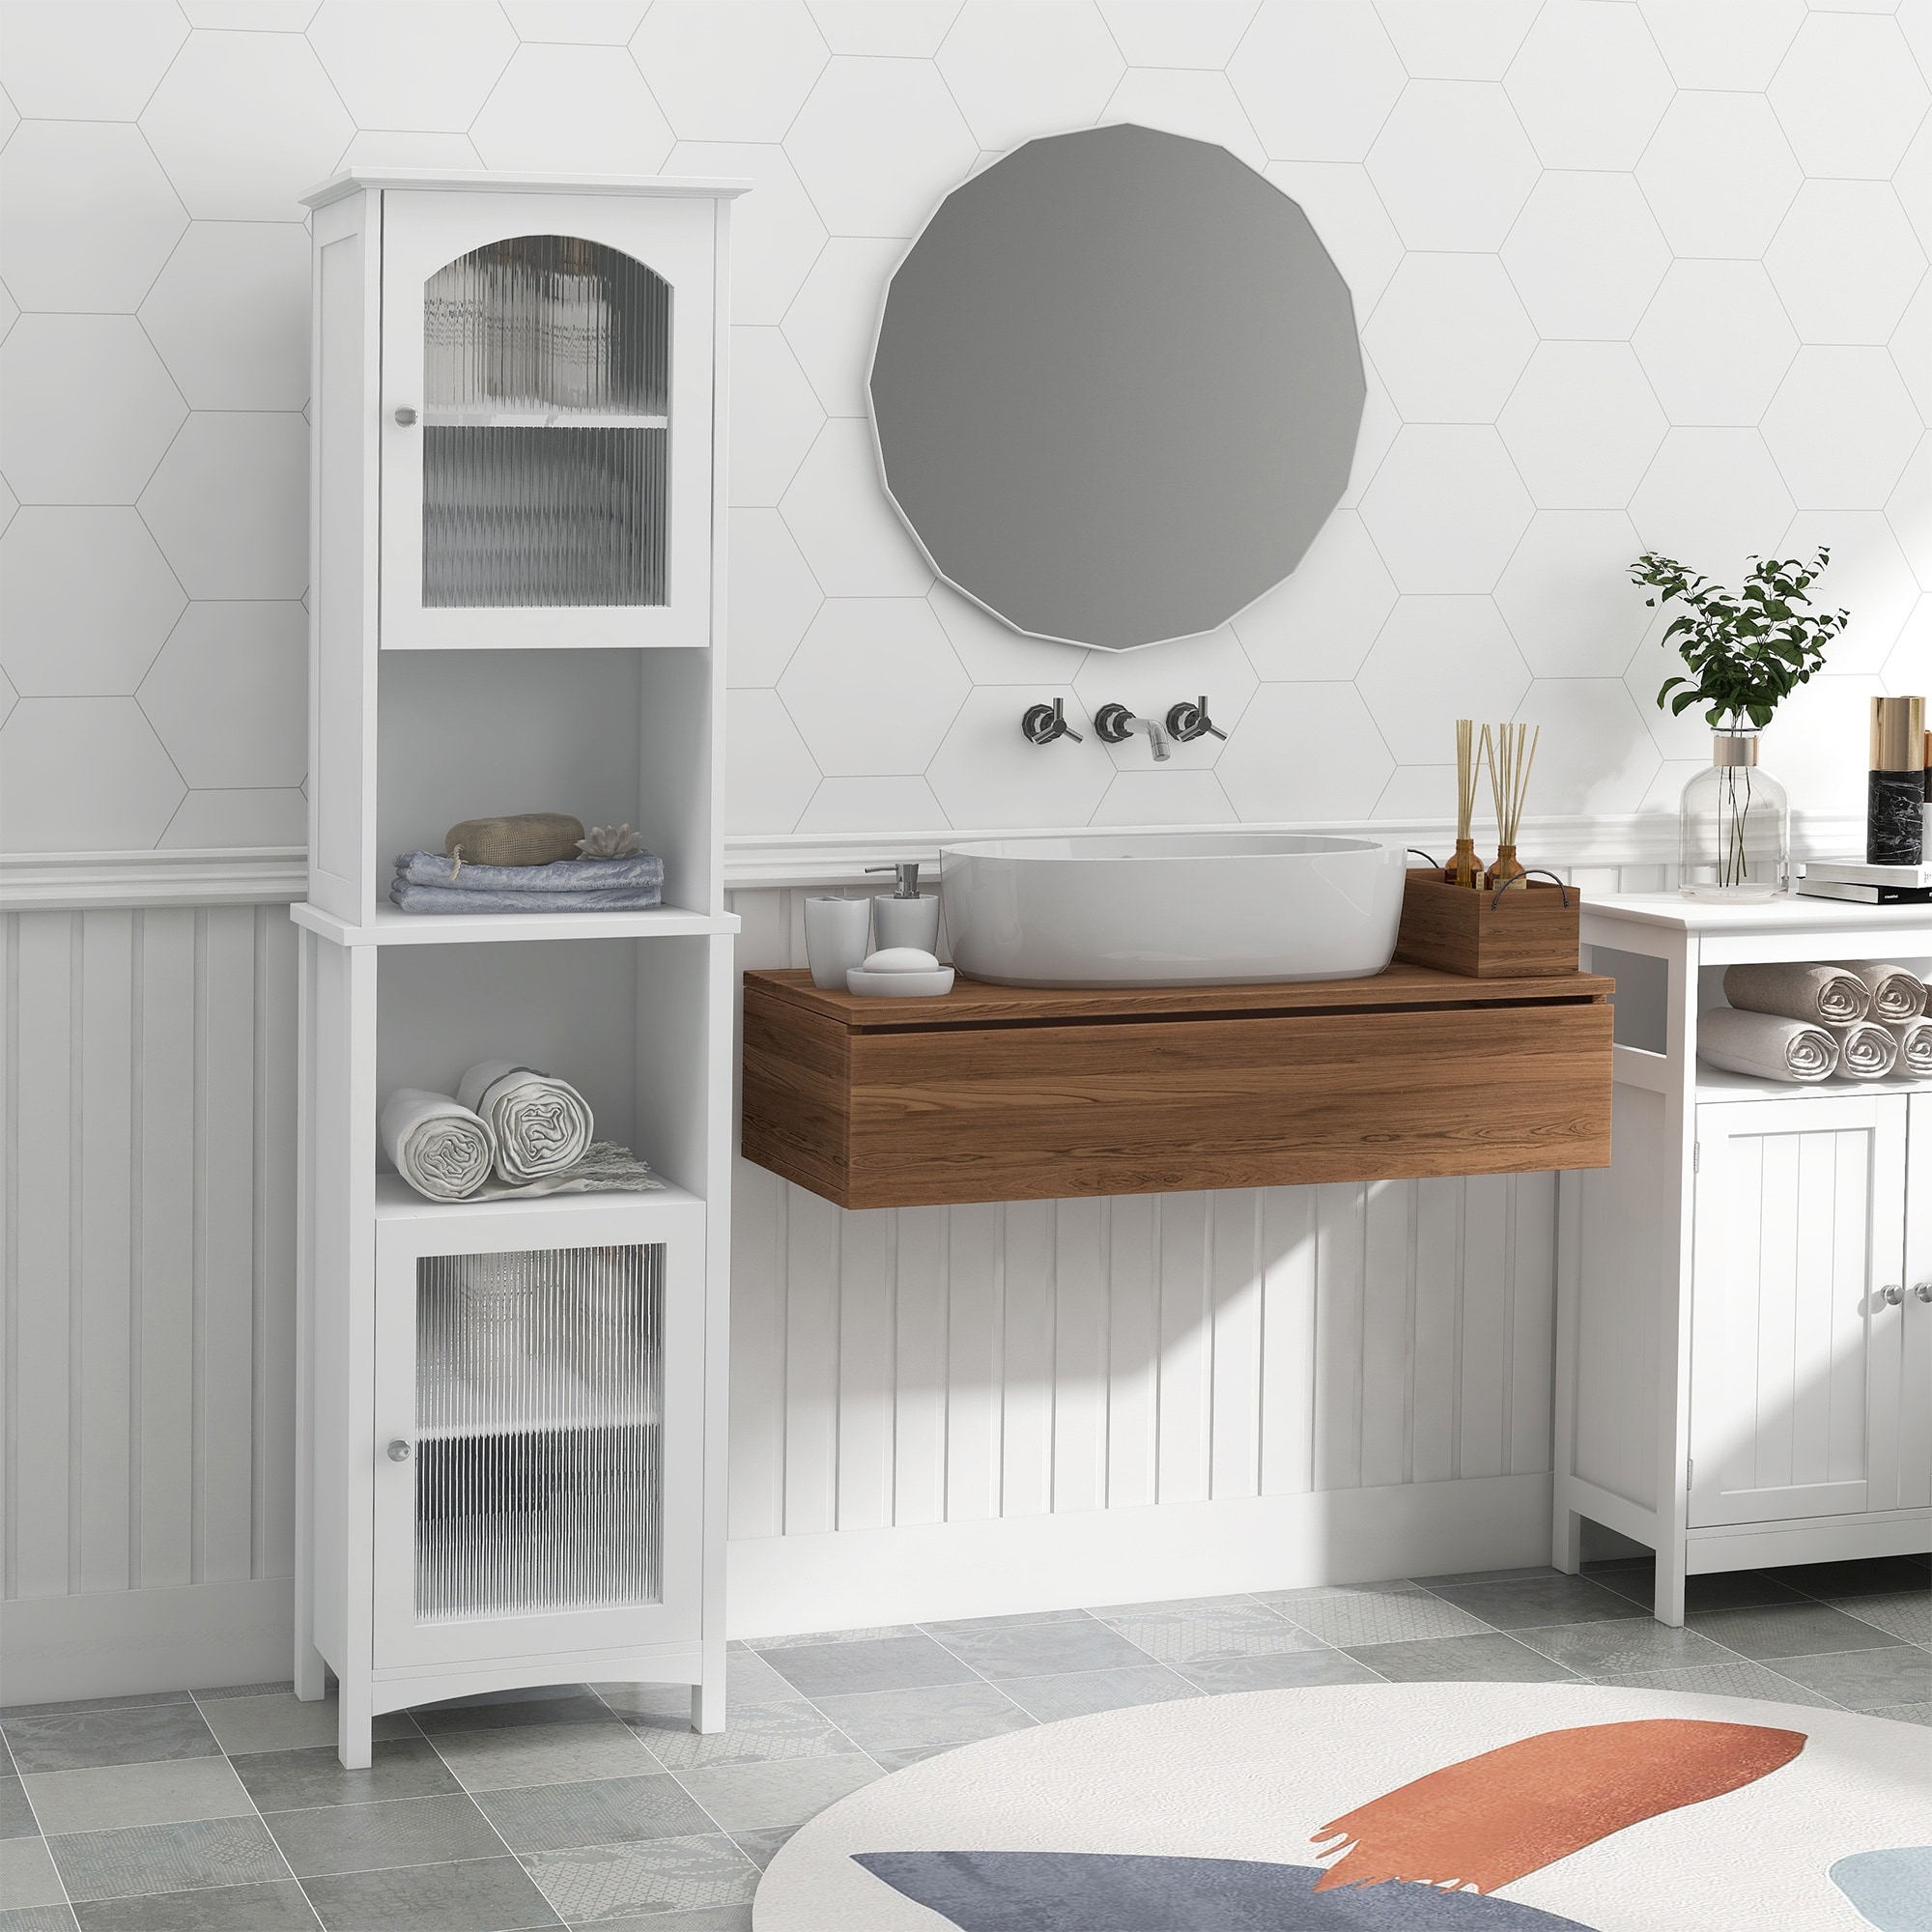 https://ak1.ostkcdn.com/images/products/is/images/direct/318c134e86b13c22ce1580f43ae8ef3759ecc326/Modern-Tall-Cabinet-Bathroom-Linen-Tower-Cabinet-with-2-Glass-Doors.jpg